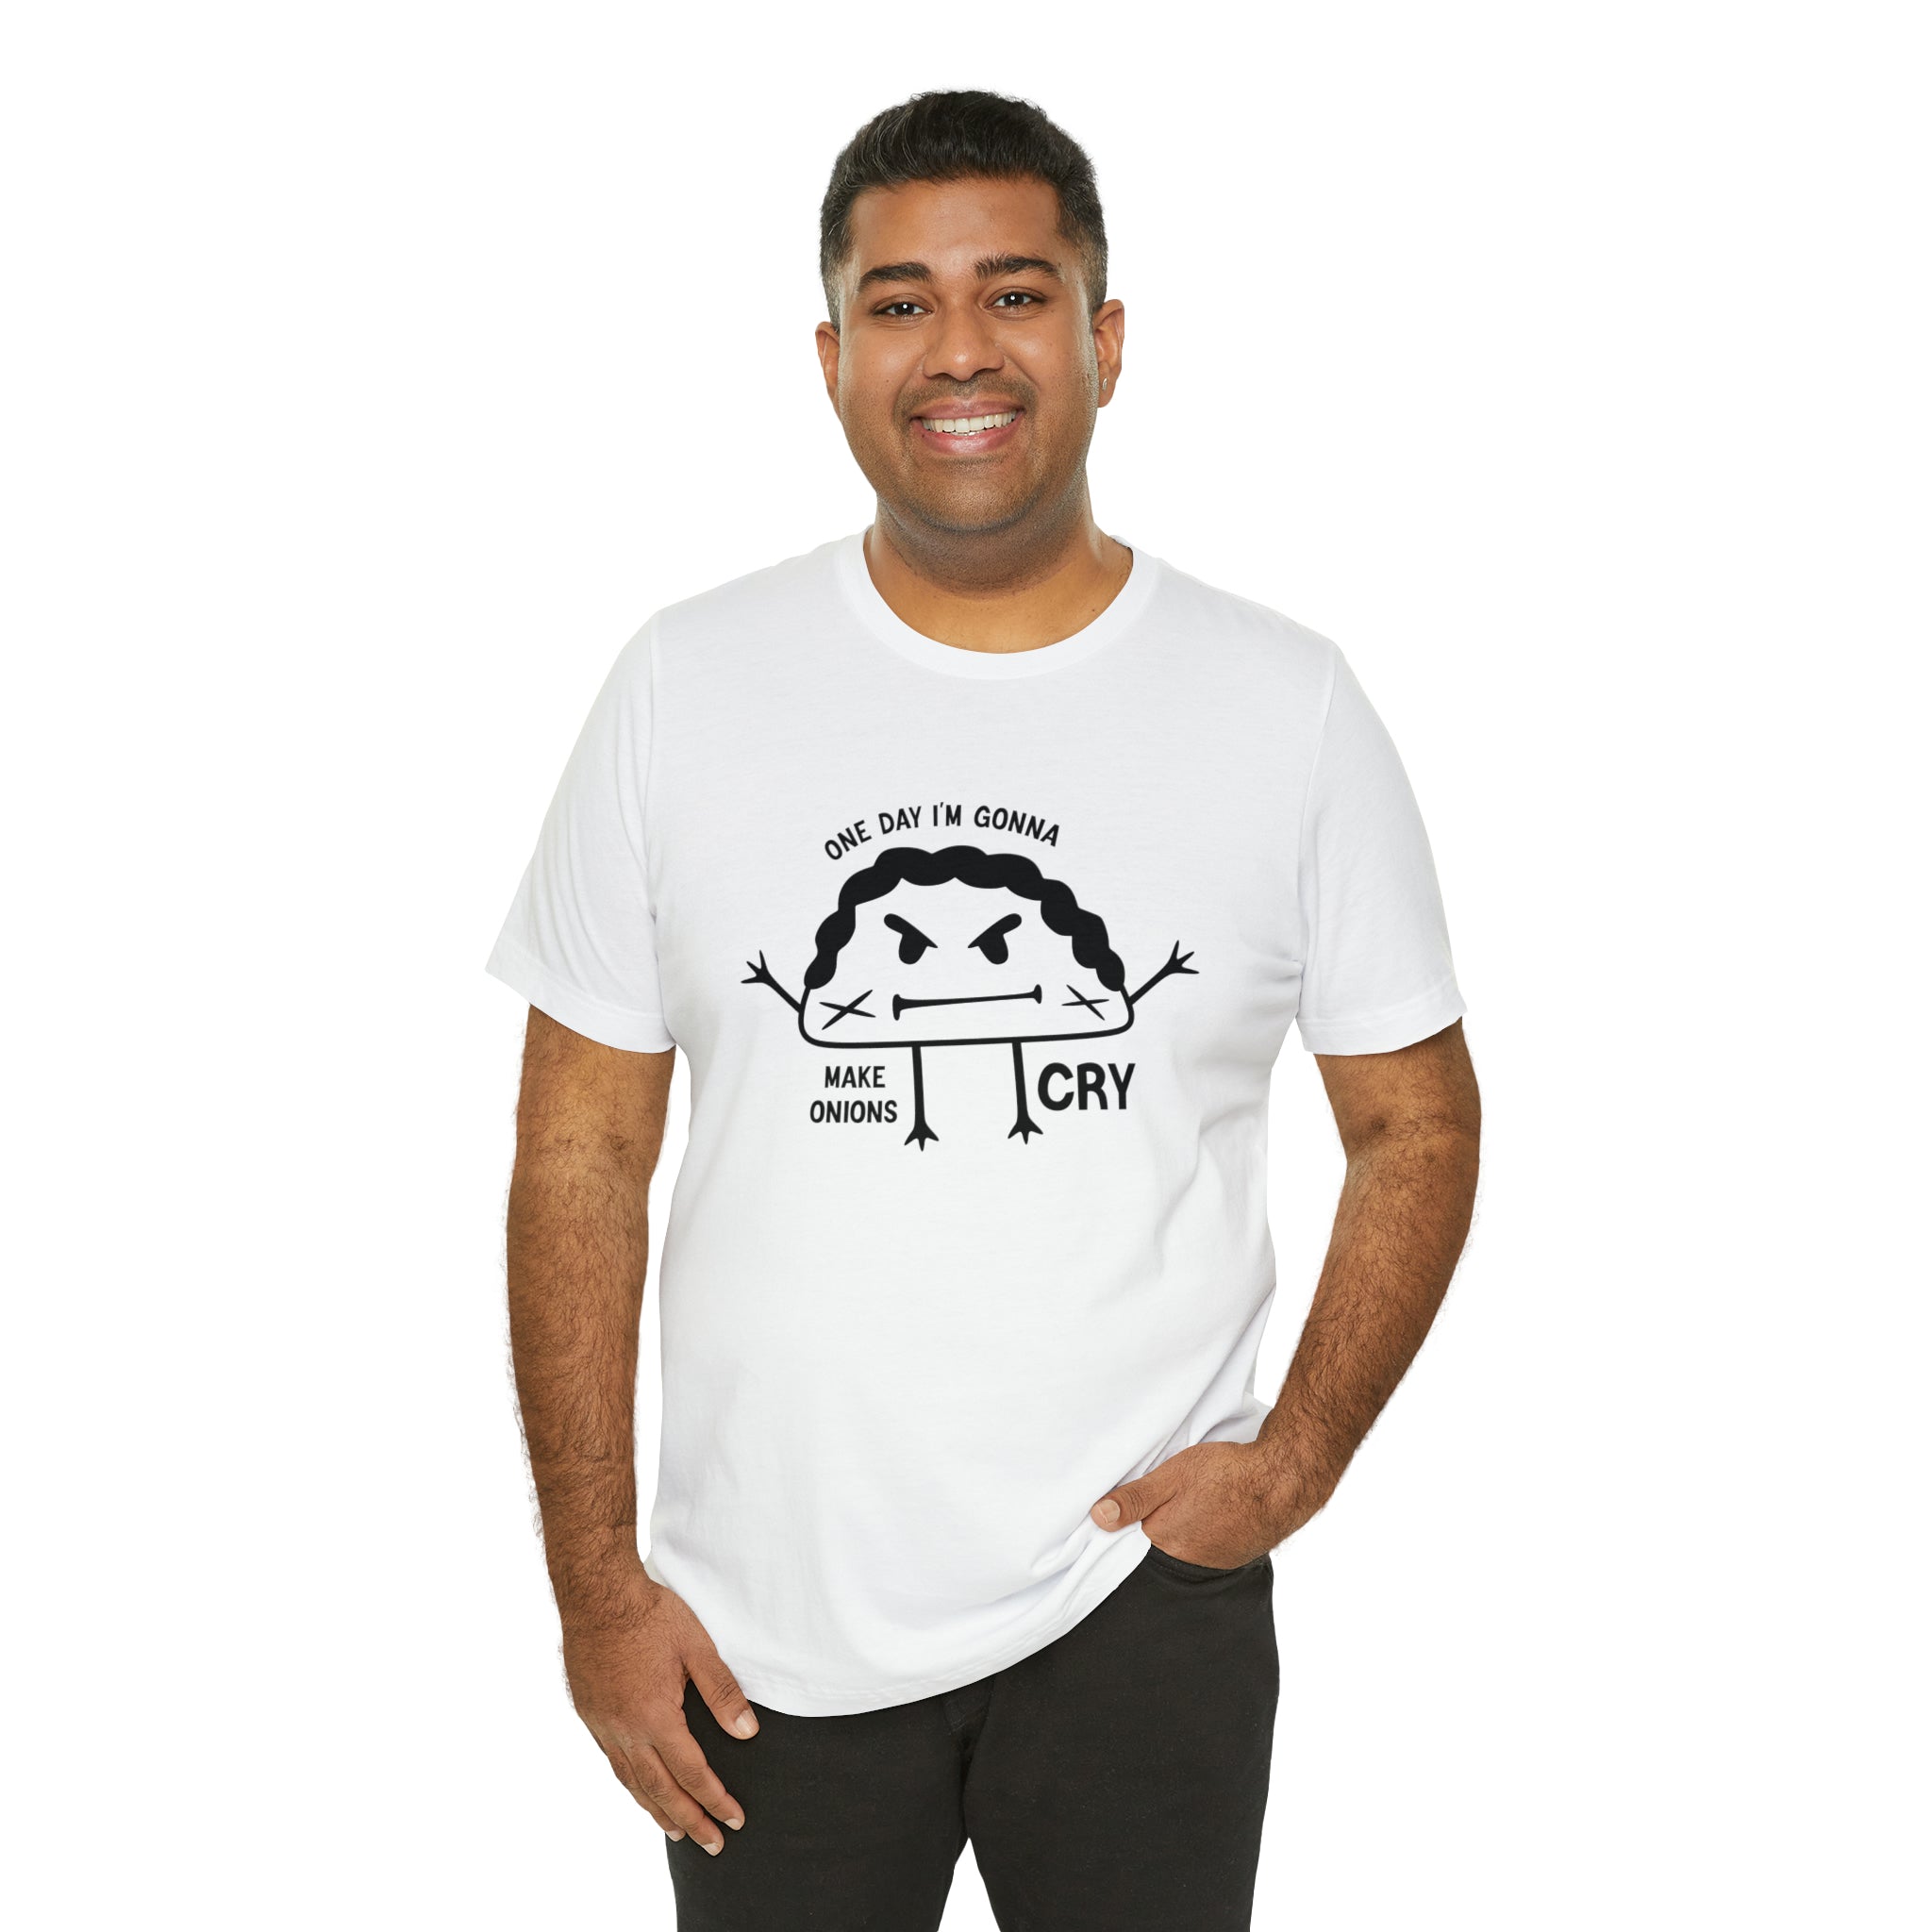 A man wearing a unique One Day Im Gonna Make Onions Cry T-Shirt.